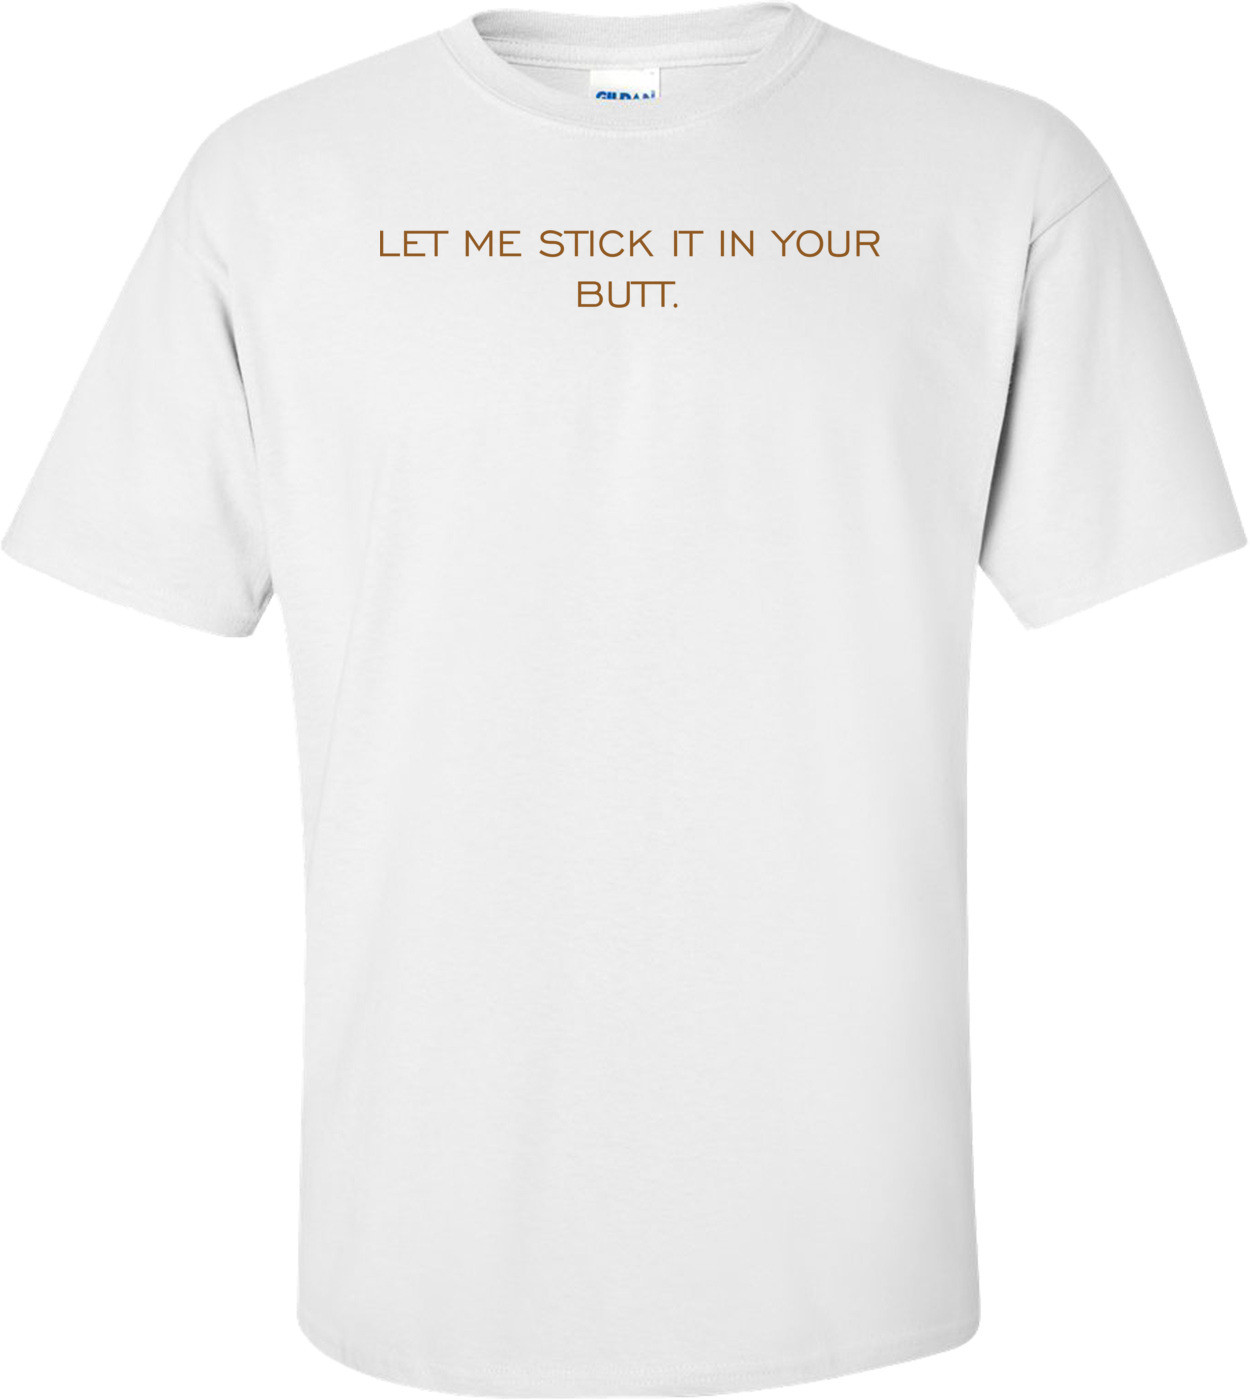 LET ME STICK IT IN YOUR BUTT. Shirt